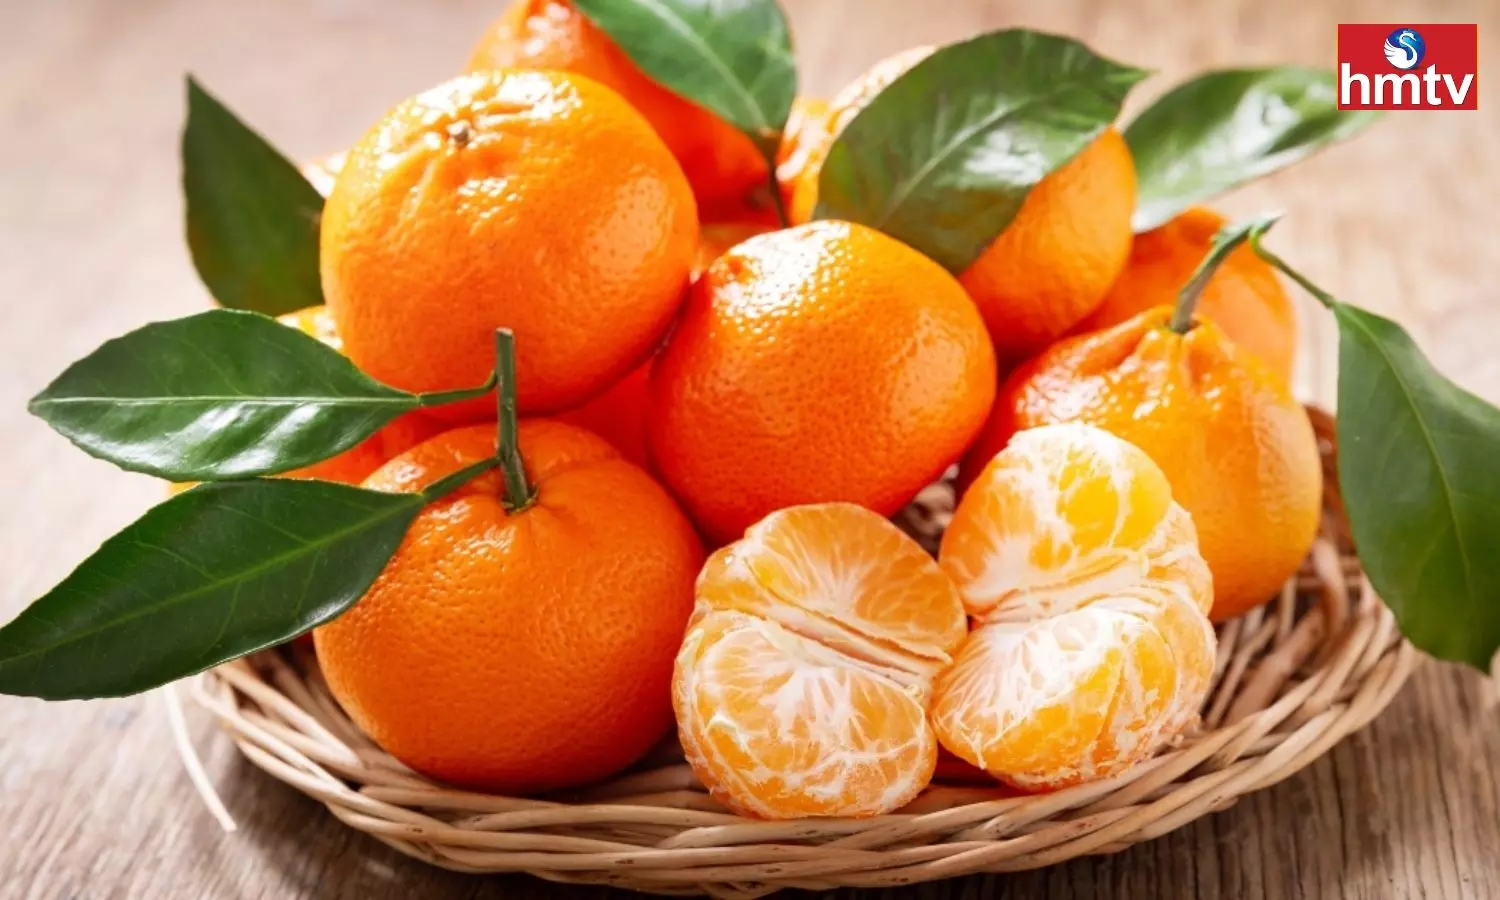 Tangerine Is Sold In The Market Under The Name Of Orange Learn How To Identify A Real Orange